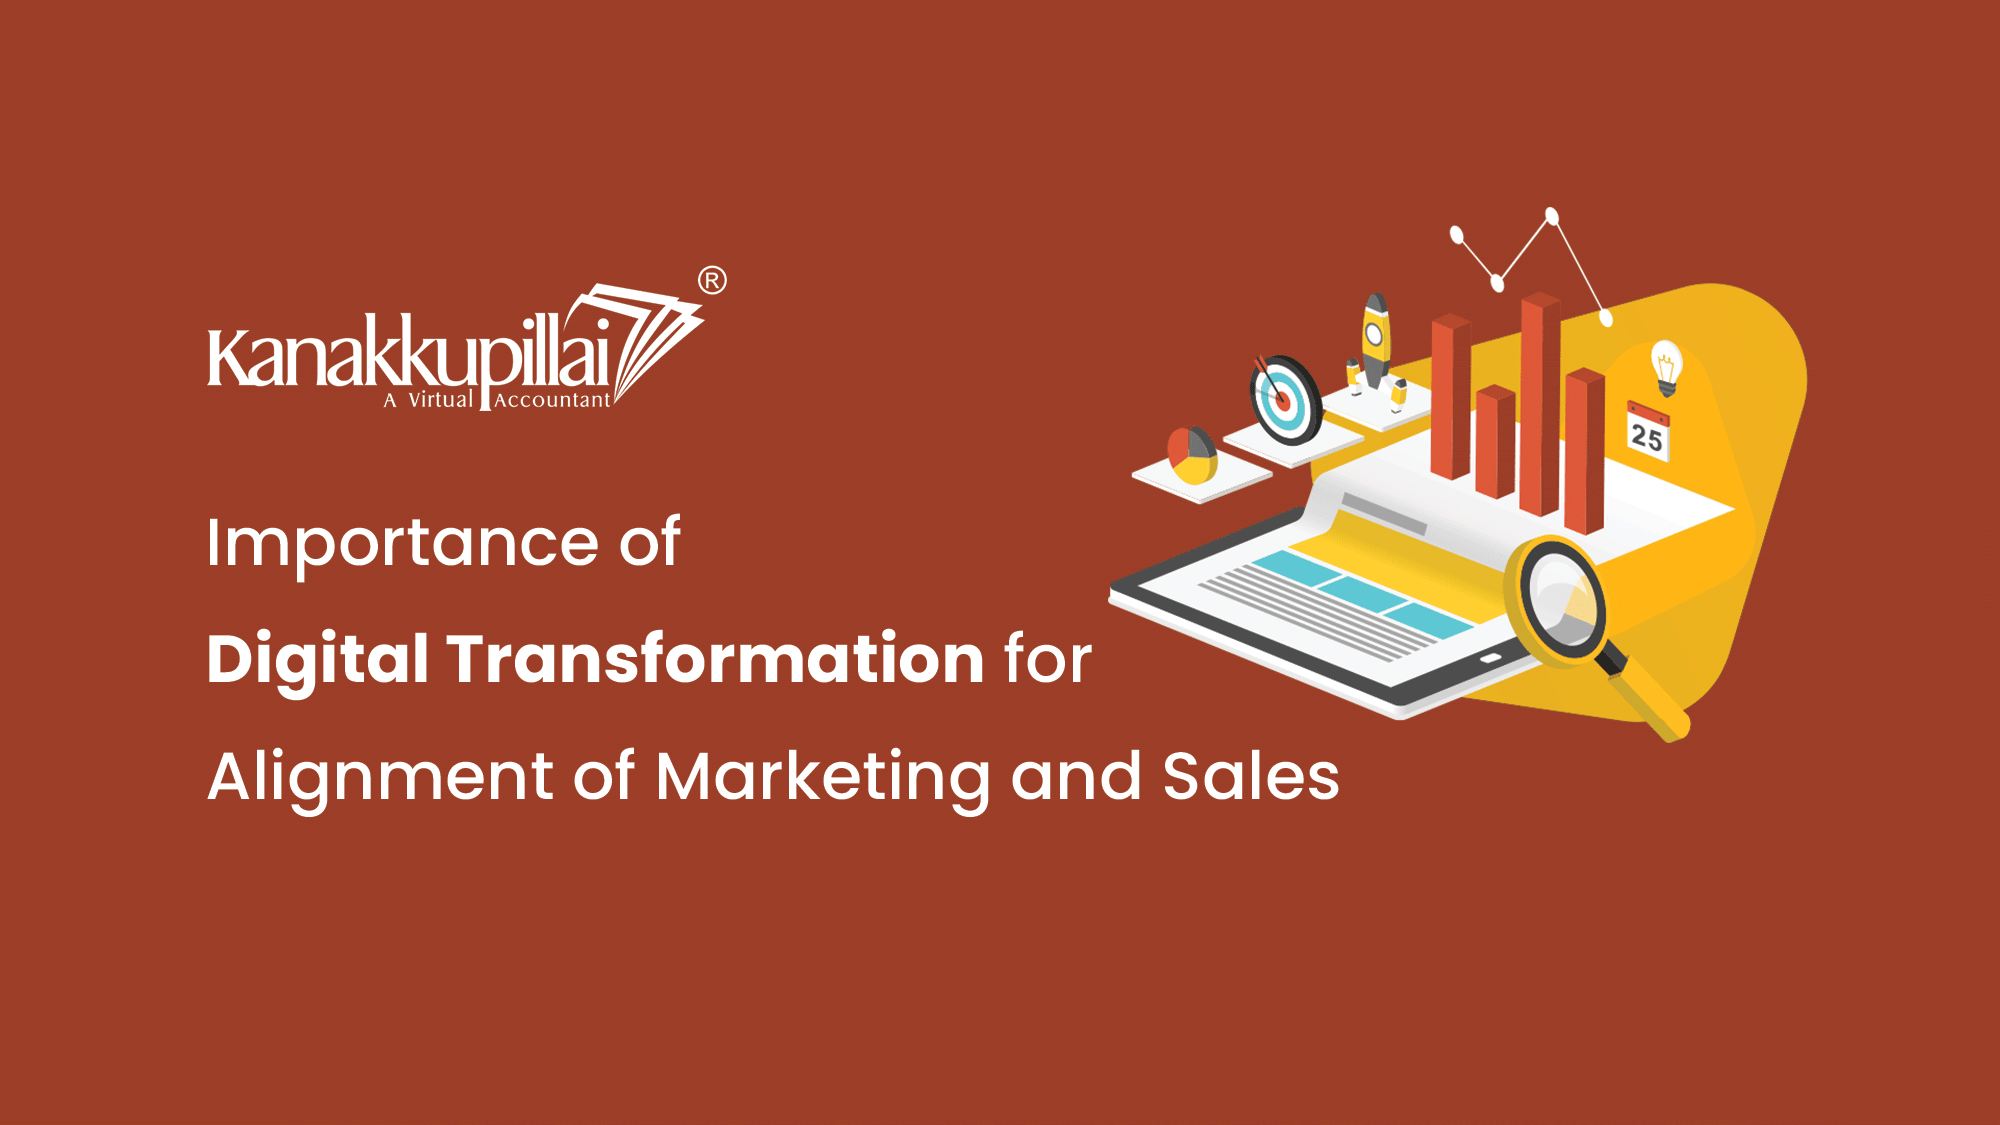 Importance of Digital Transformation for Alignment of Marketing and Sales